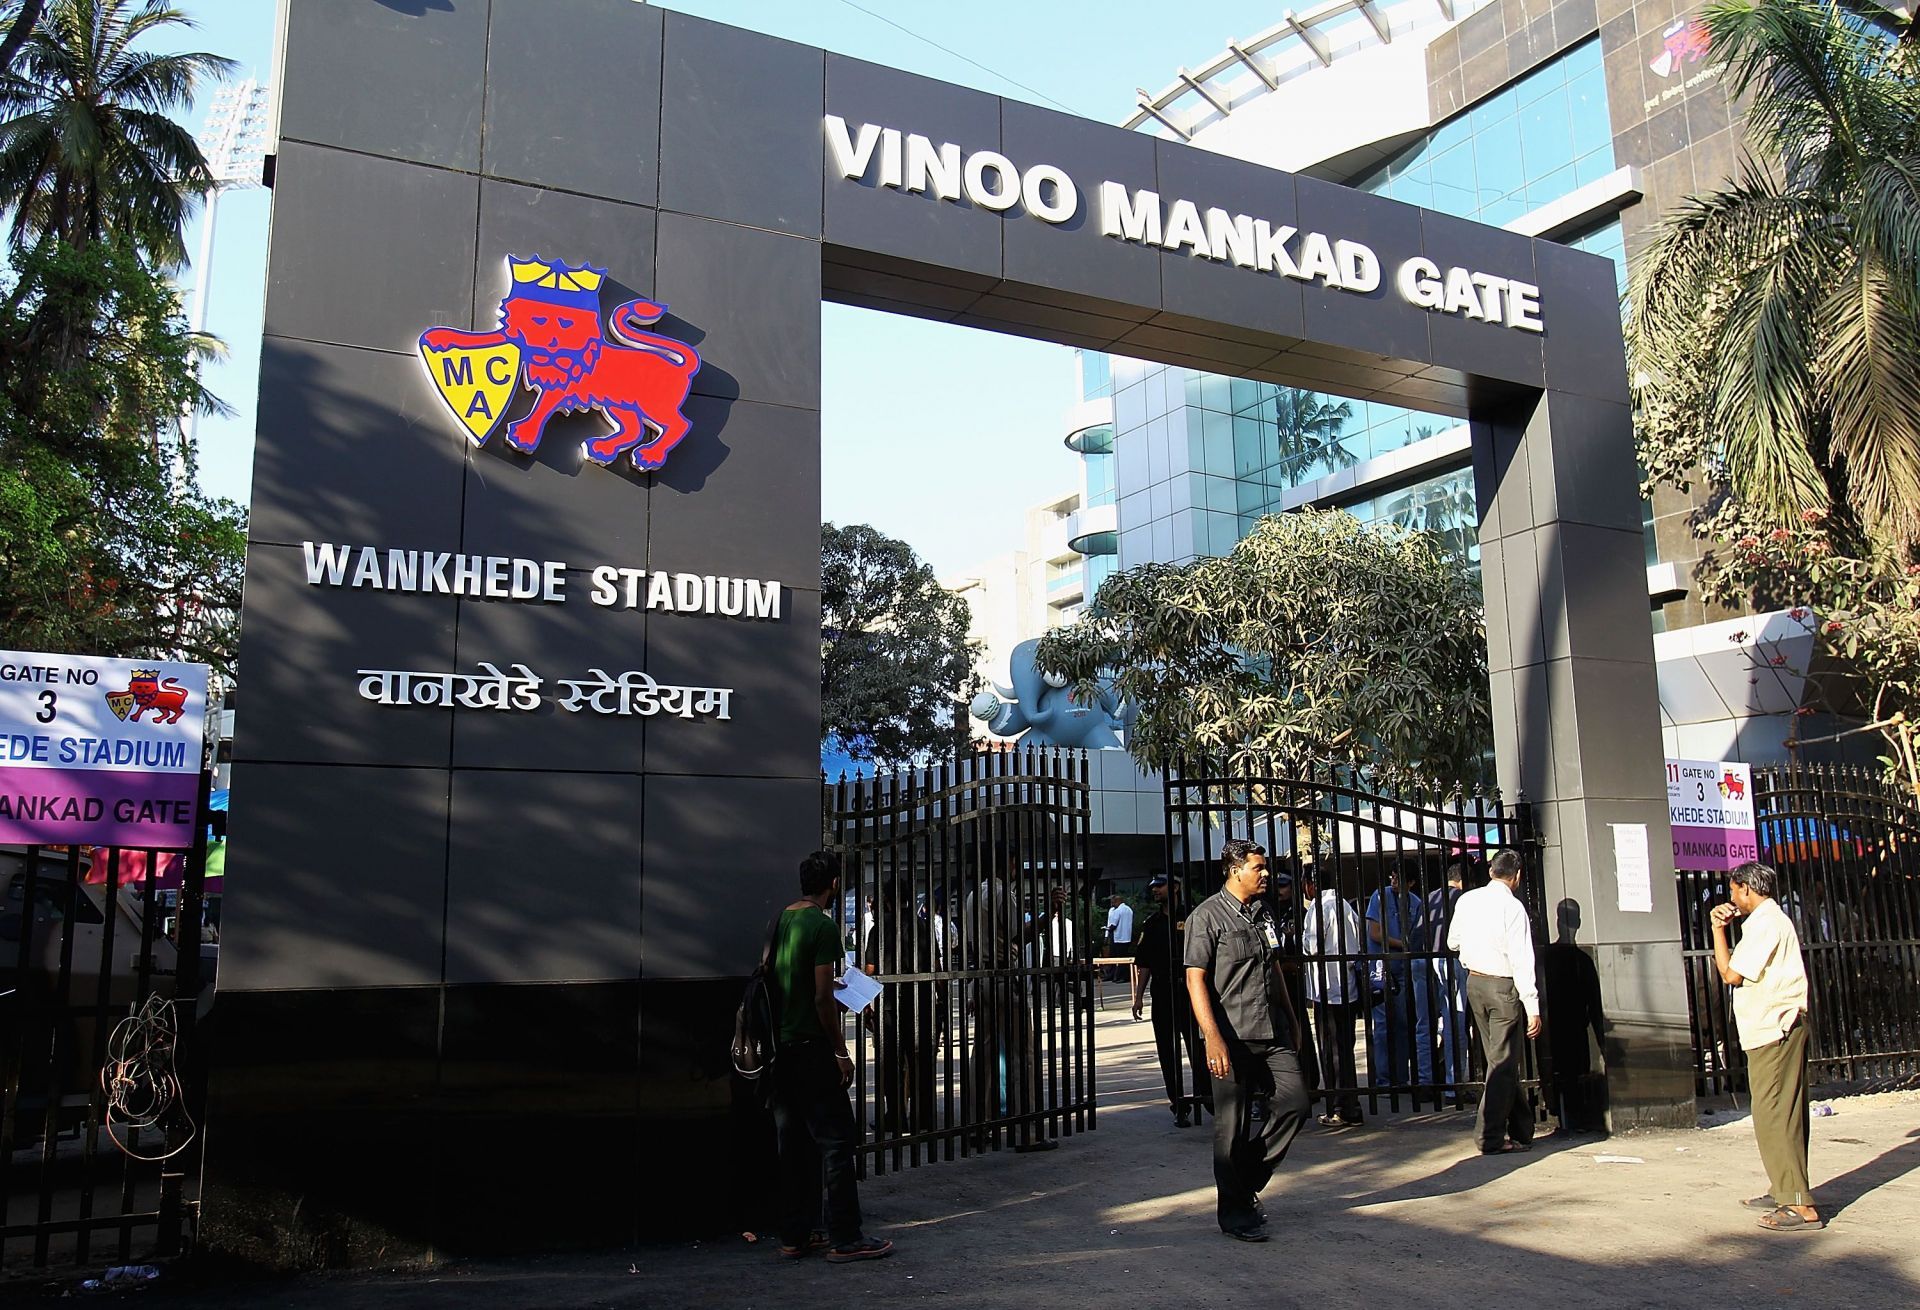 Wankhede Stadium will host its first Test match since 2016